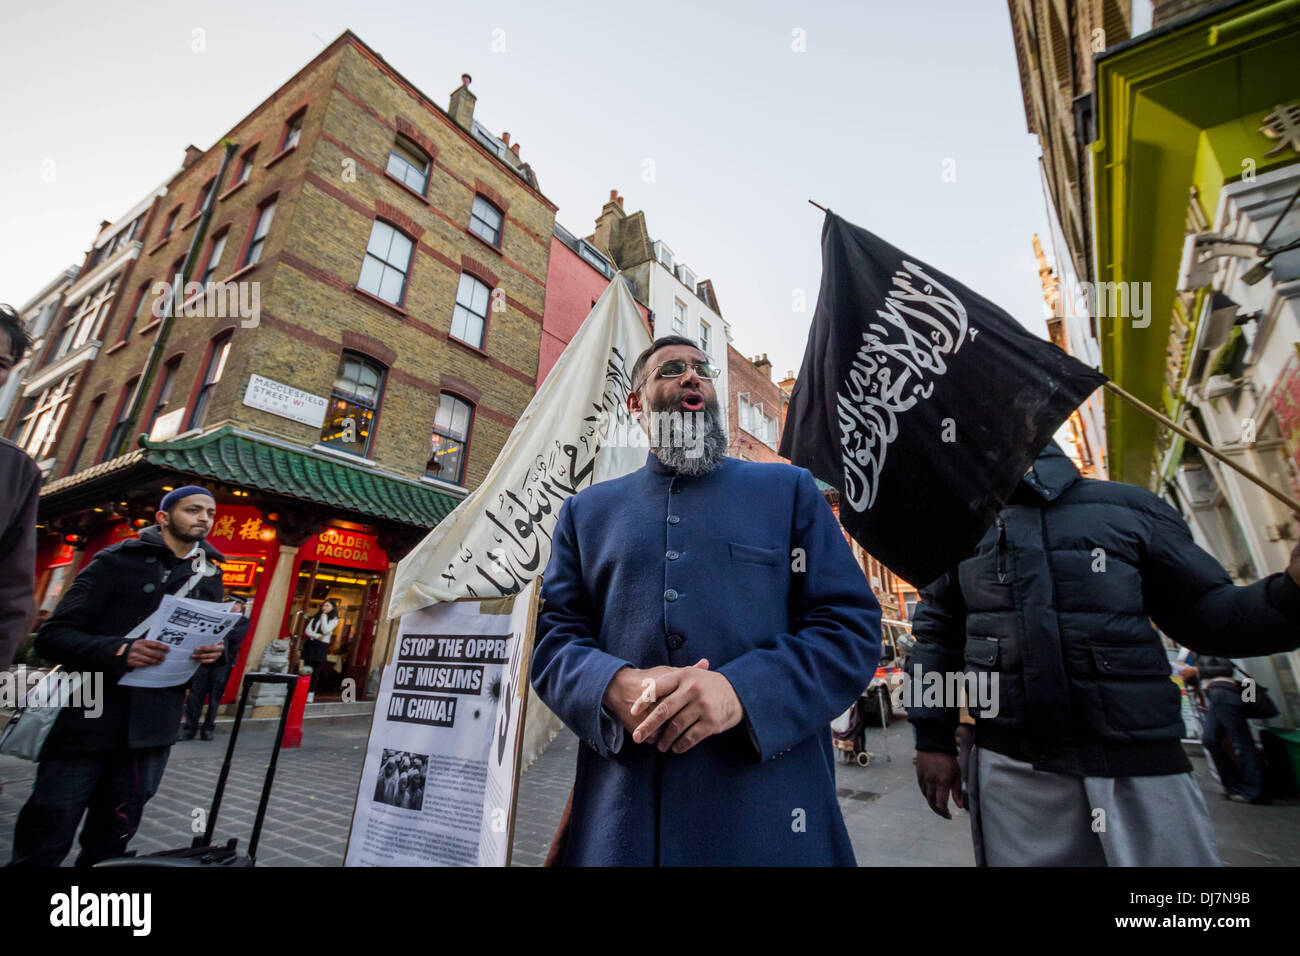 Radical Islamist Anjem Choudary protests in London’s Chinatown Stock Photo